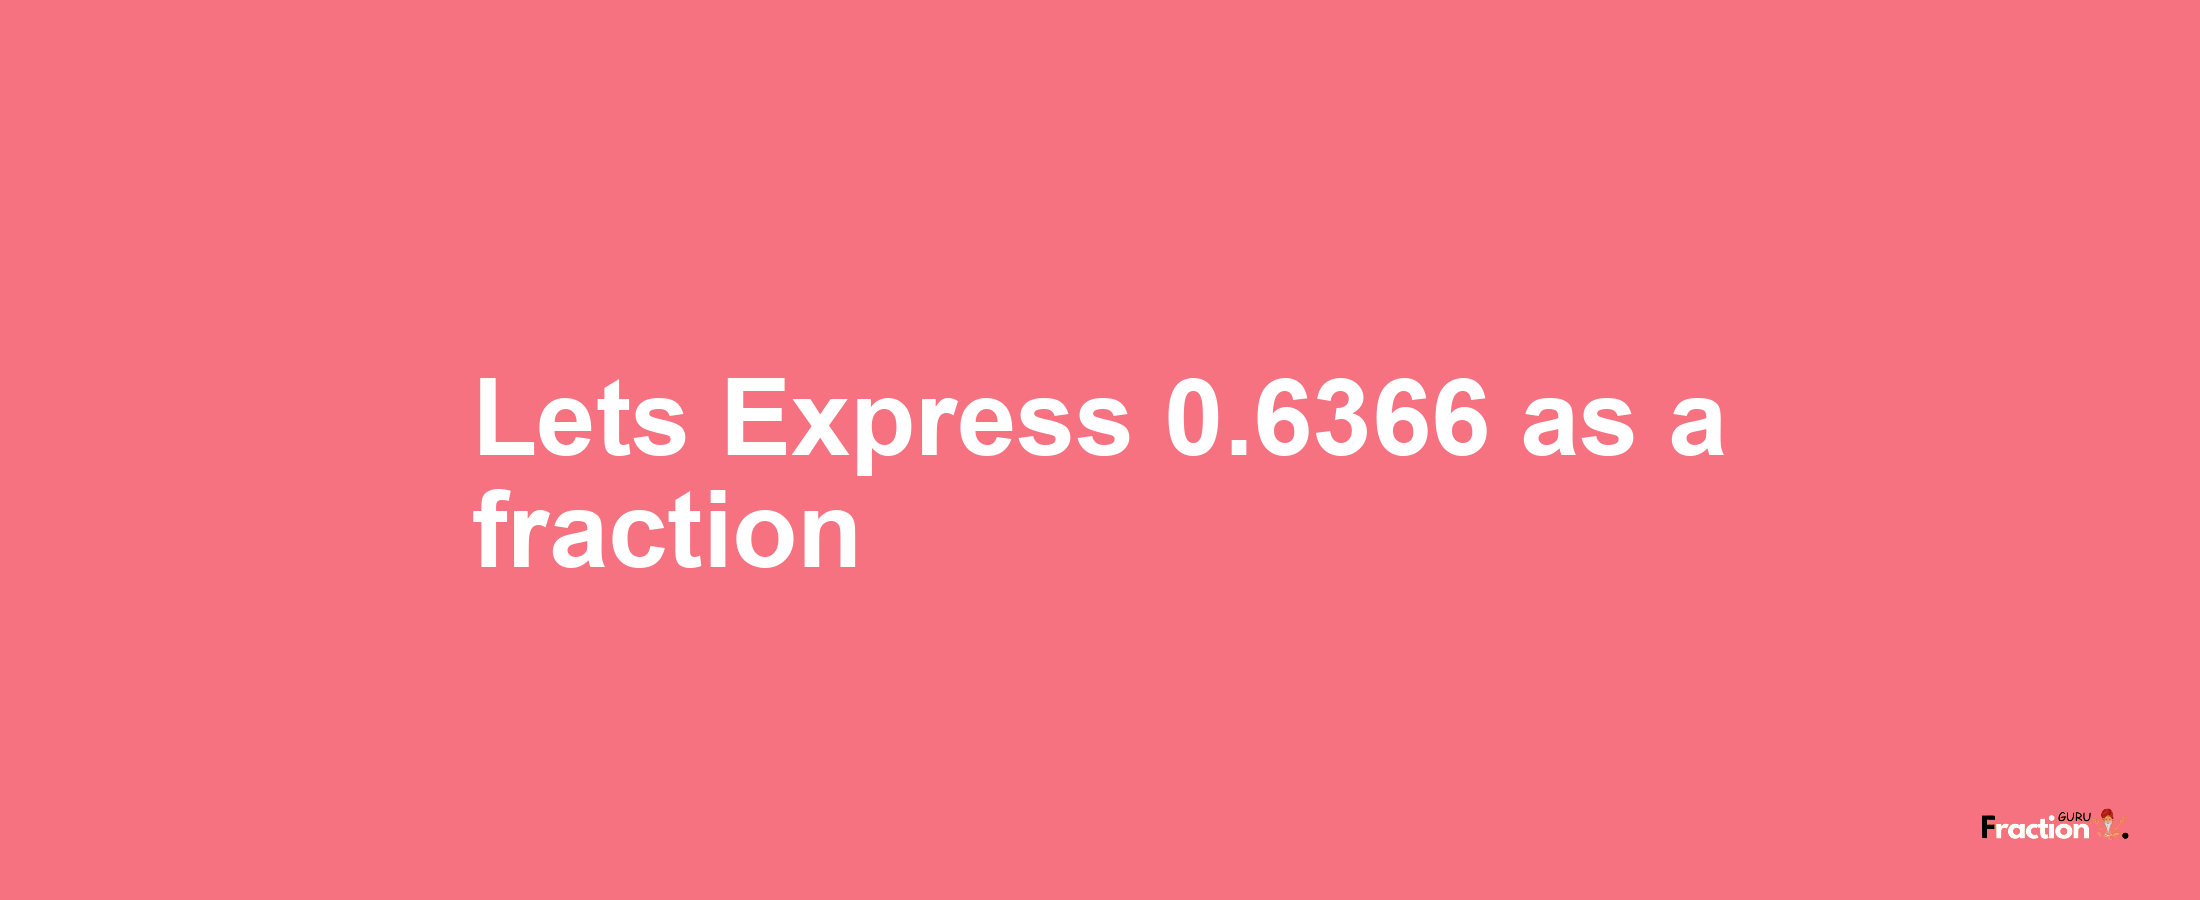 Lets Express 0.6366 as afraction